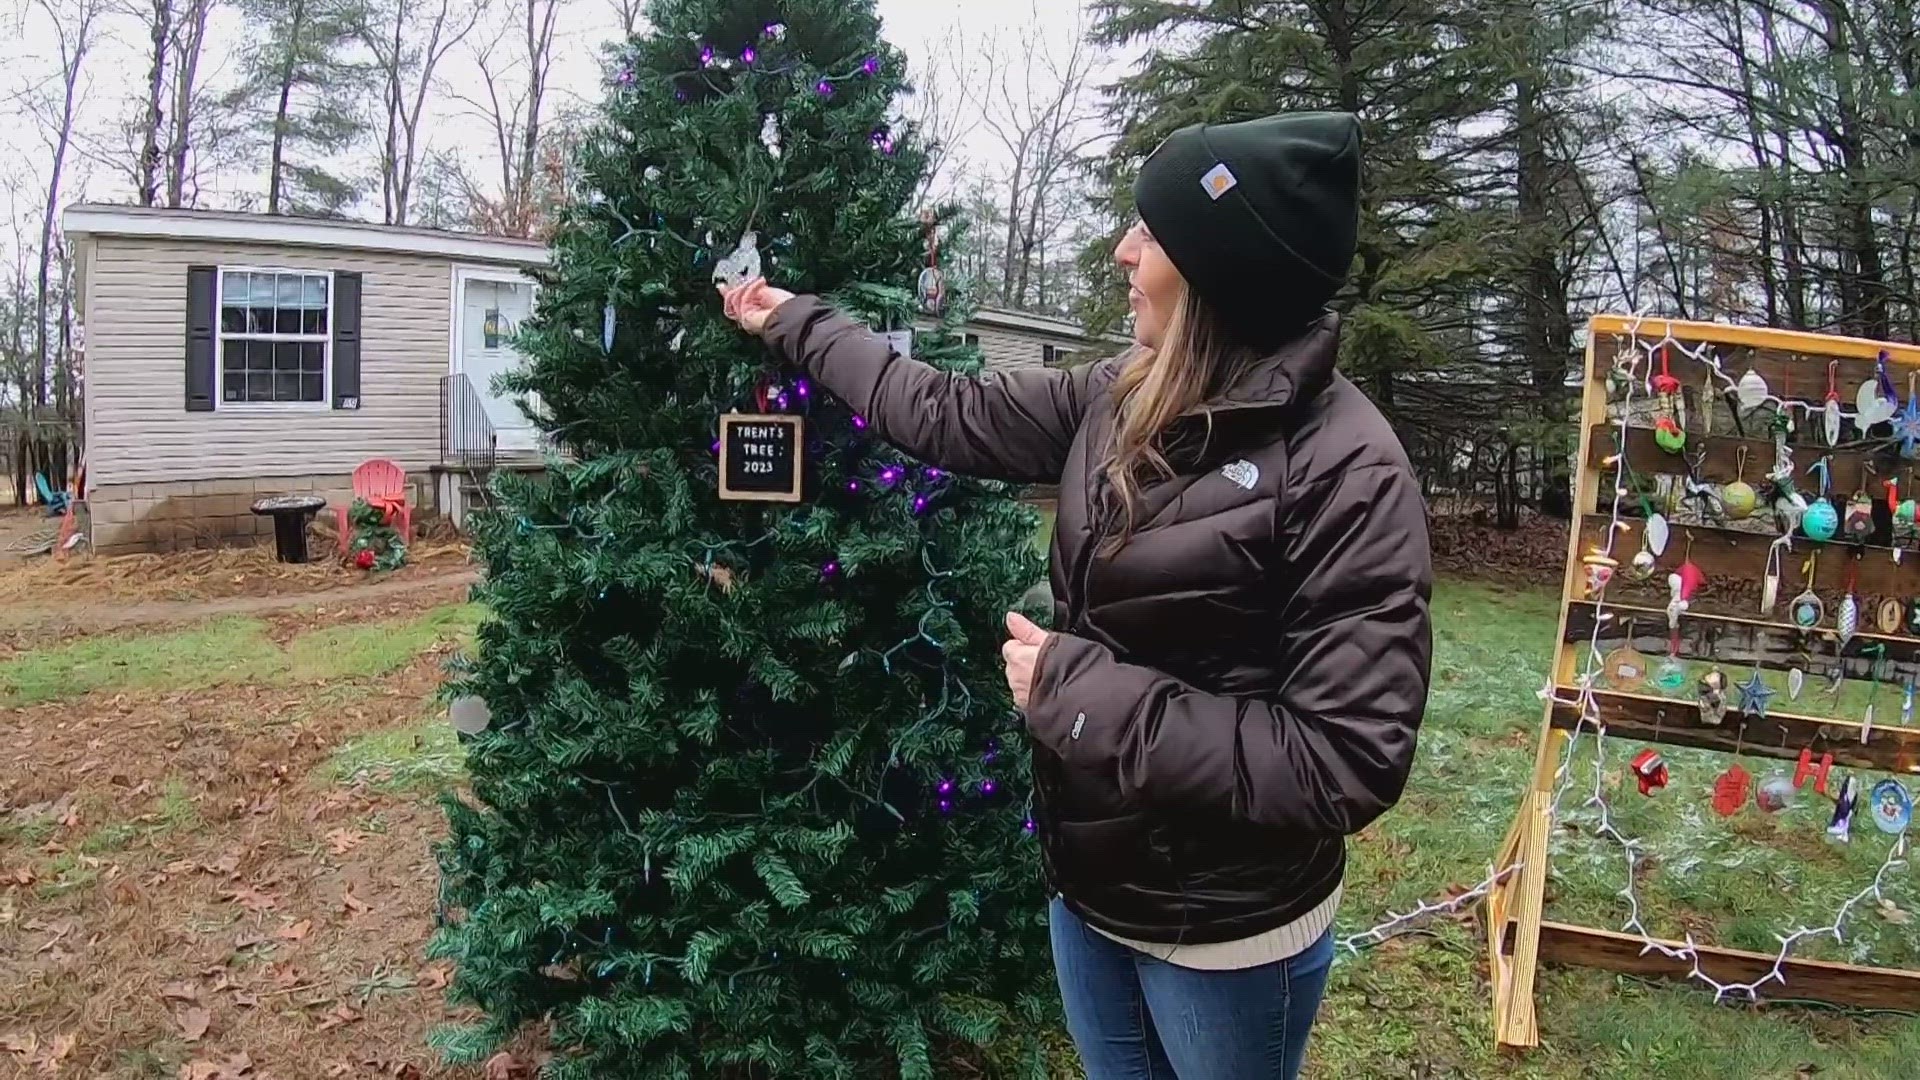 Angela Whitten of Wells began the "Trent's Tree" movement last December after losing her teenage son, Trent Gibson, to suicide in June of 2022.